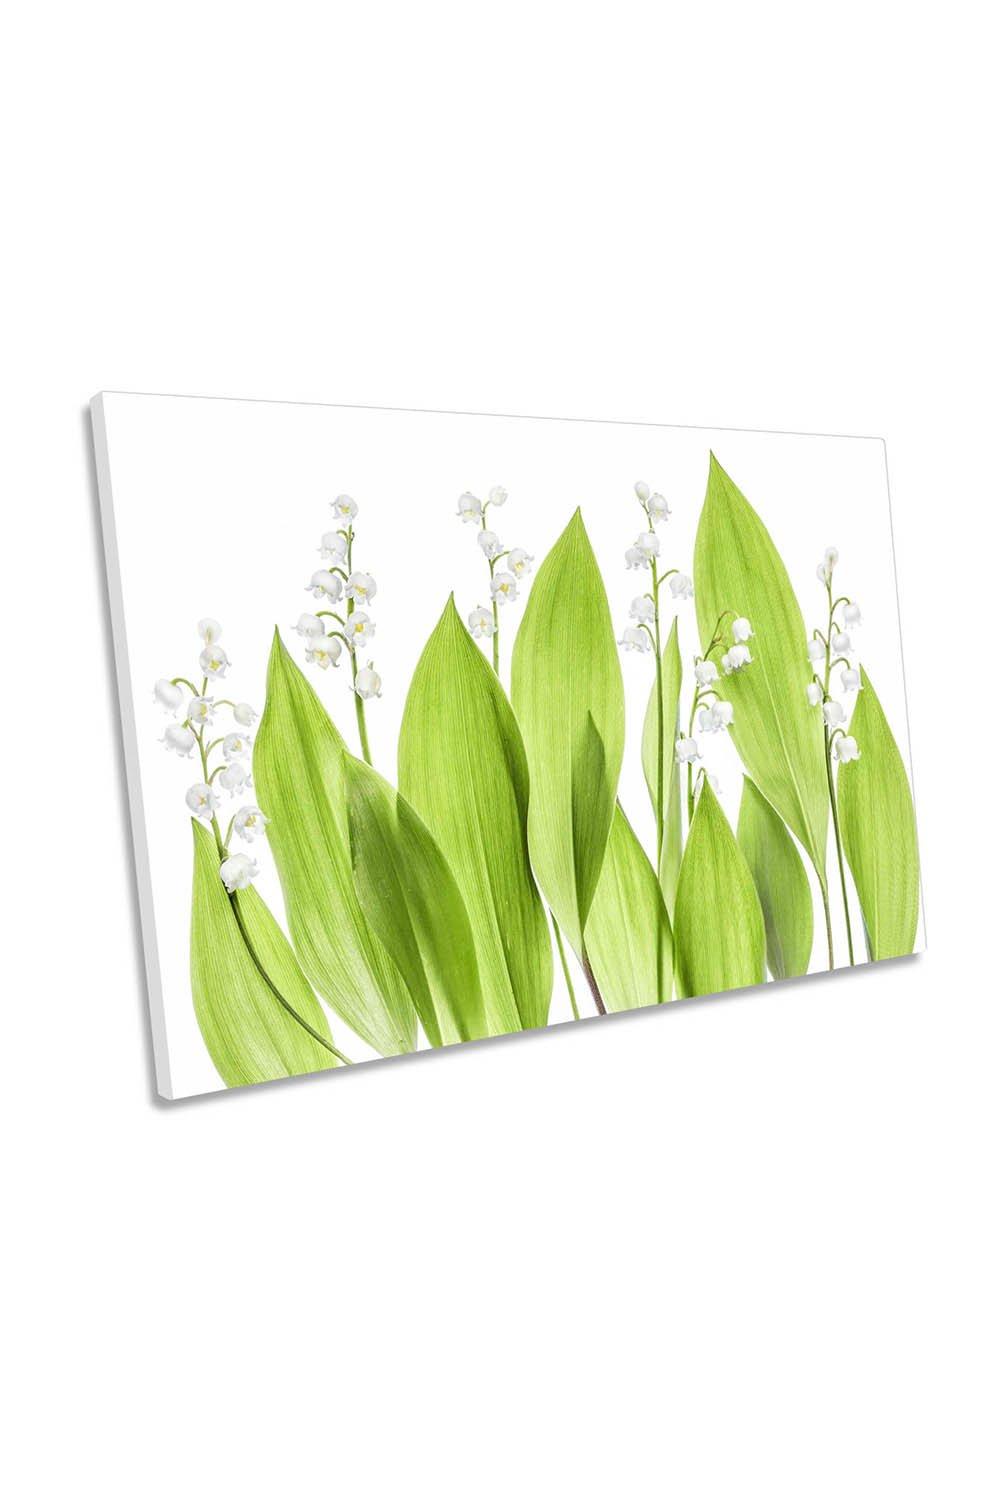 Lily of the Valley Green Floral Canvas Wall Art Picture Print